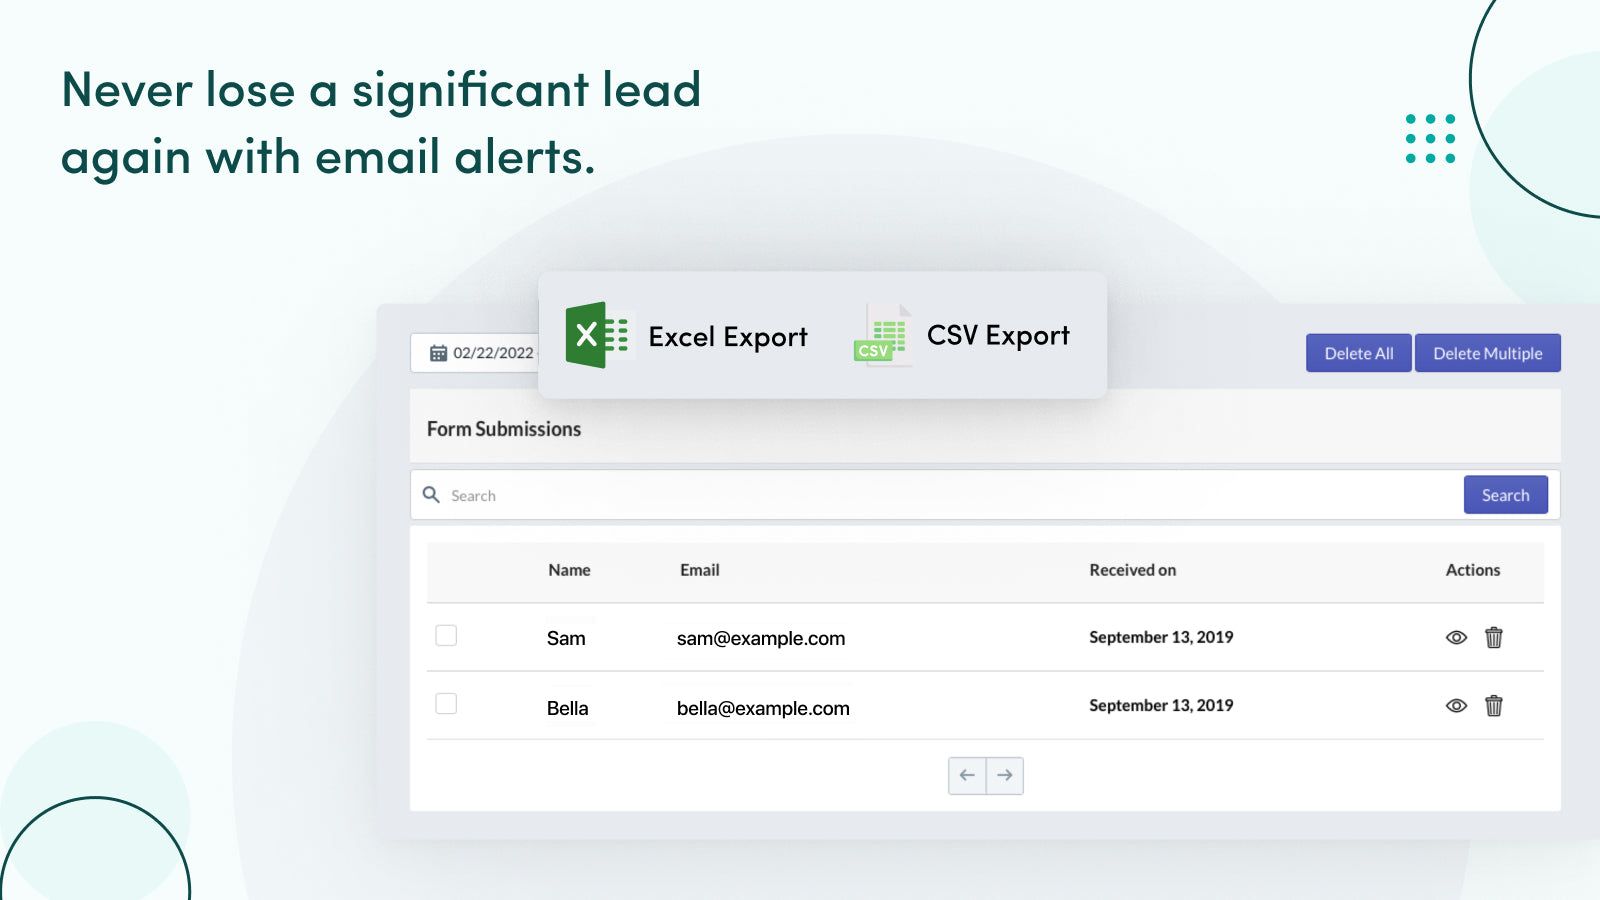 With email alerts, you'll never miss another significant lead. 